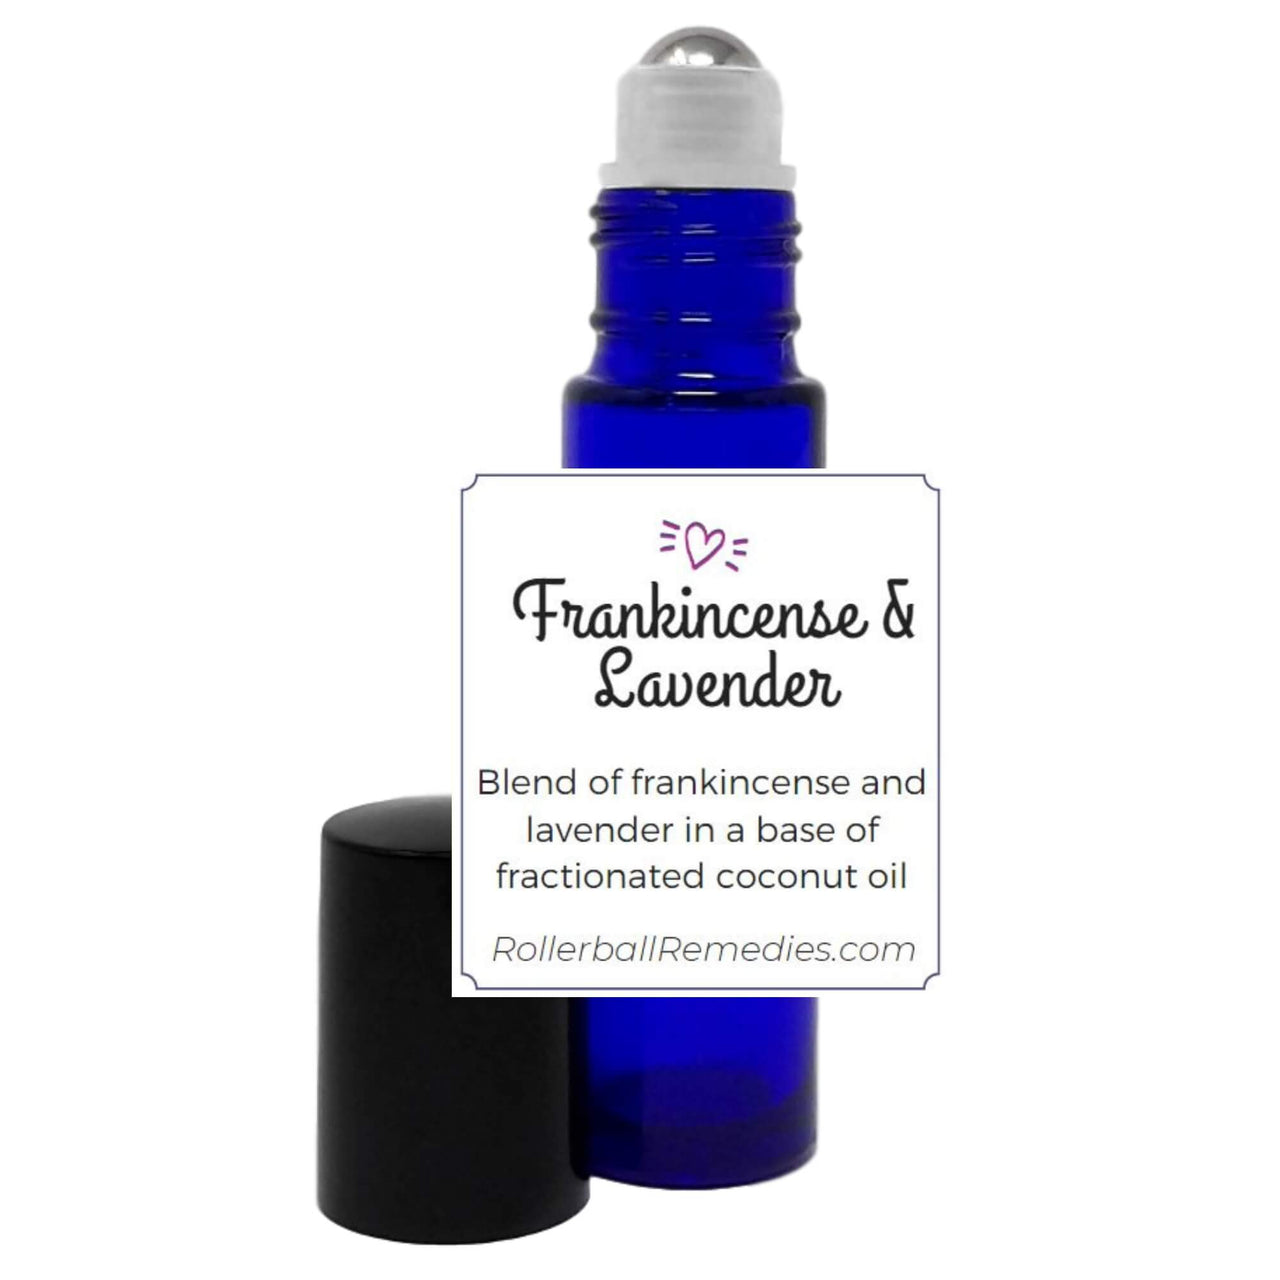 Frankincense and Lavender Essential Oil Blend - 10 ml Roller Bottle Aromatherapy Oils